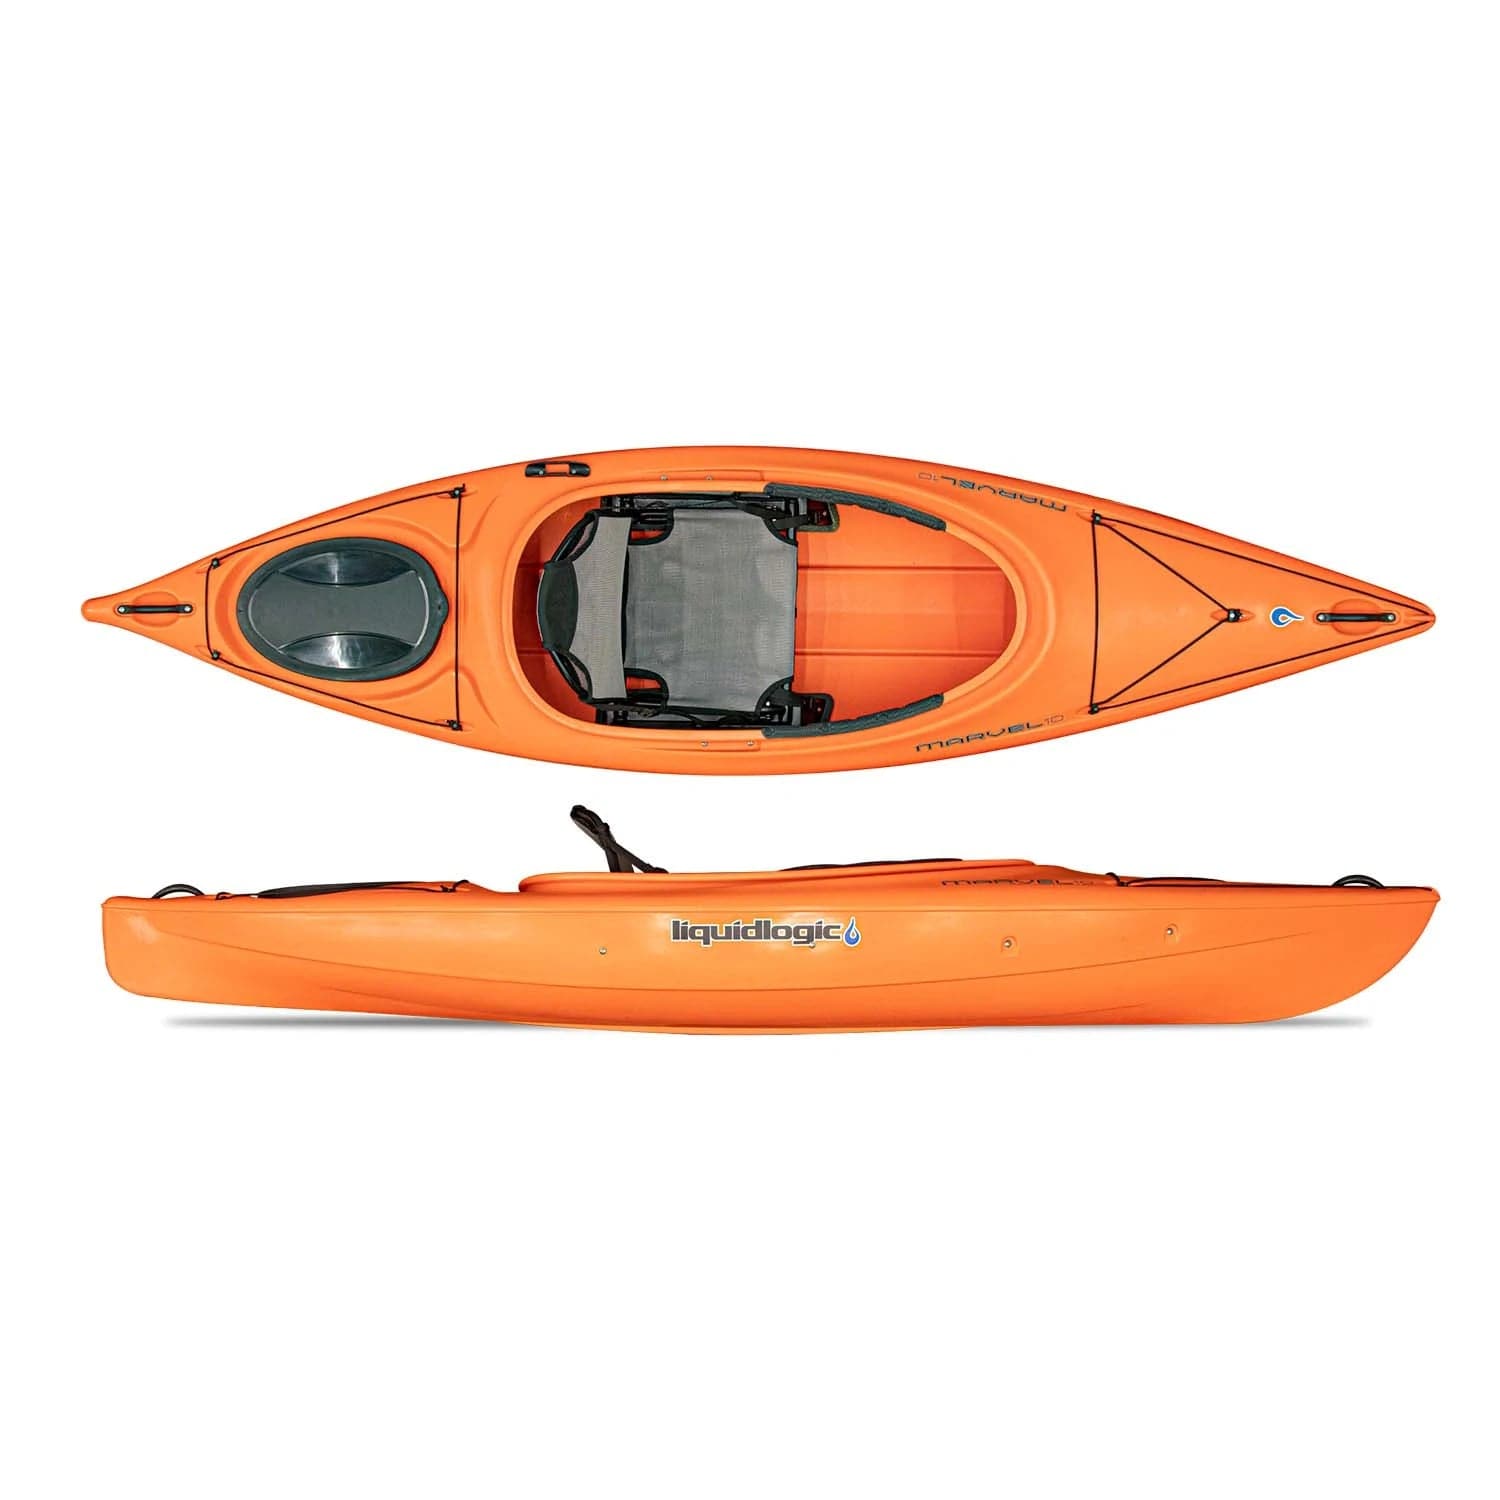 Featuring the Marvel 10' and 12' sit-inside rec / touring kayak manufactured by LiquidLogic shown here from a second angle.